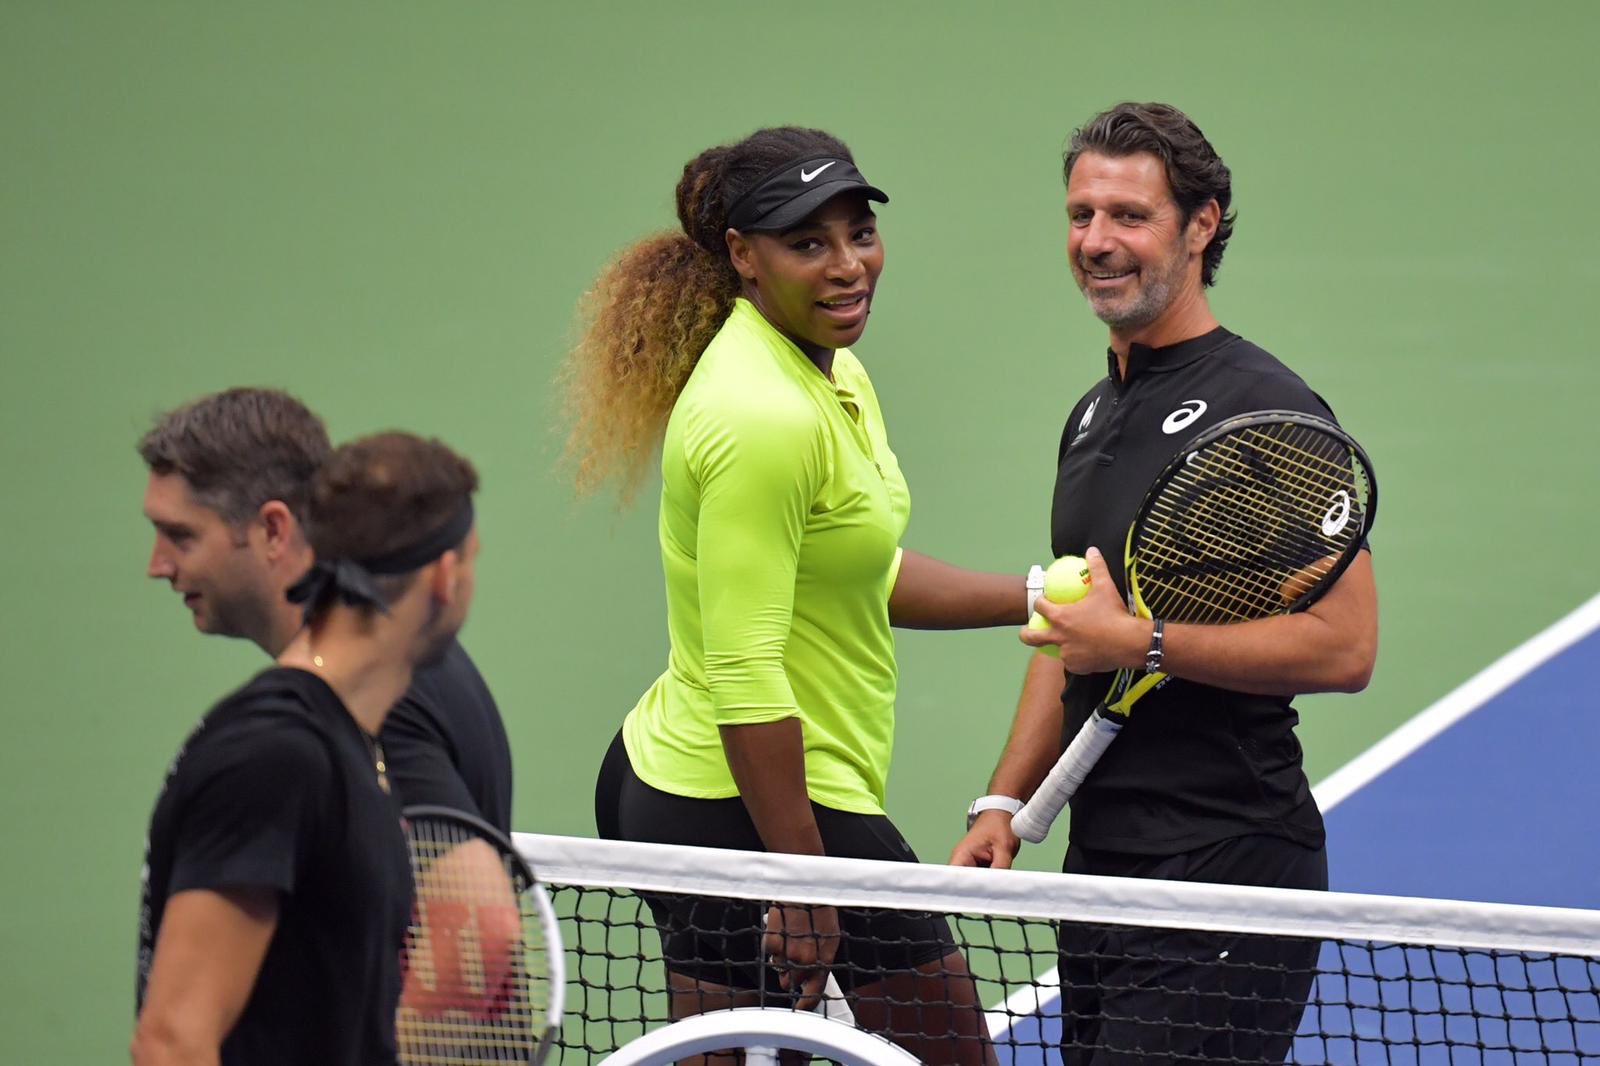 In a letter posted on Twitter and addressed to the tennis community, Patrick Mouratoglou (L) said the current situation showed how "dysfunctional" the sport of tennis was.